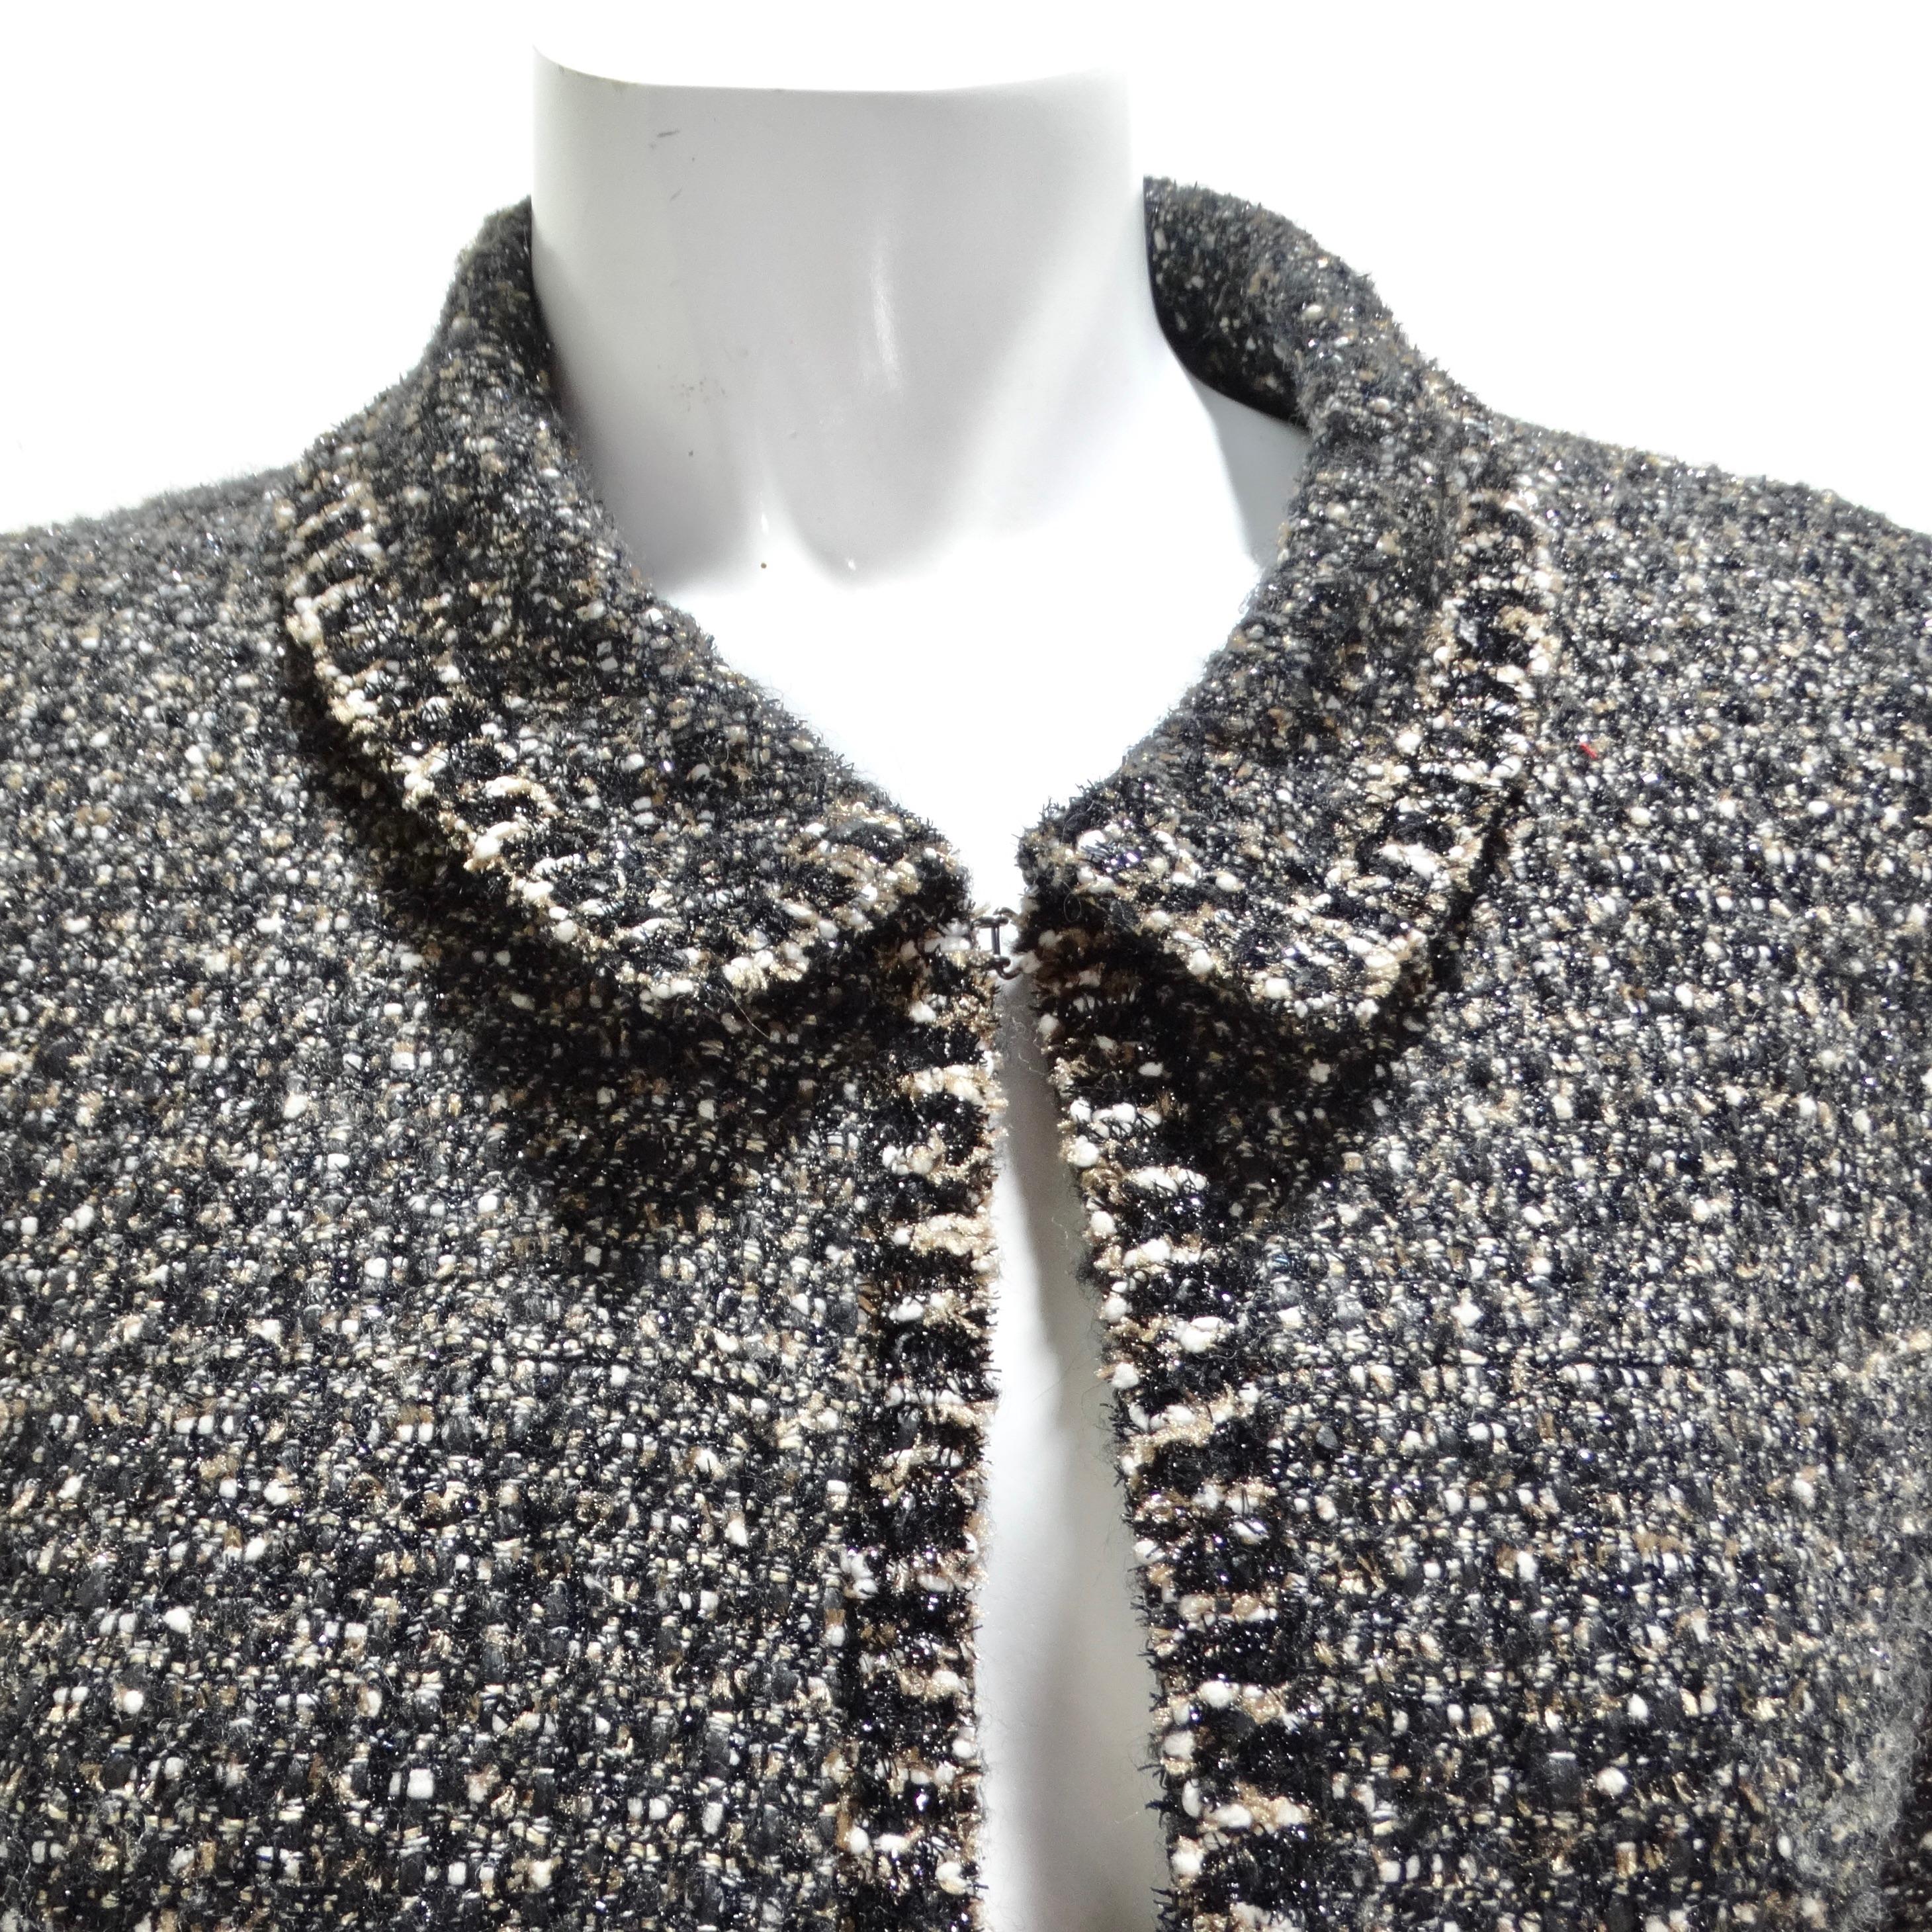 The Chanel Vintage Black Tweed Blazer is a classic and sophisticated piece that encapsulates the timeless elegance for which Chanel is celebrated. This vintage blazer, crafted from black and metallic tweed, is designed with a pointed collar and four